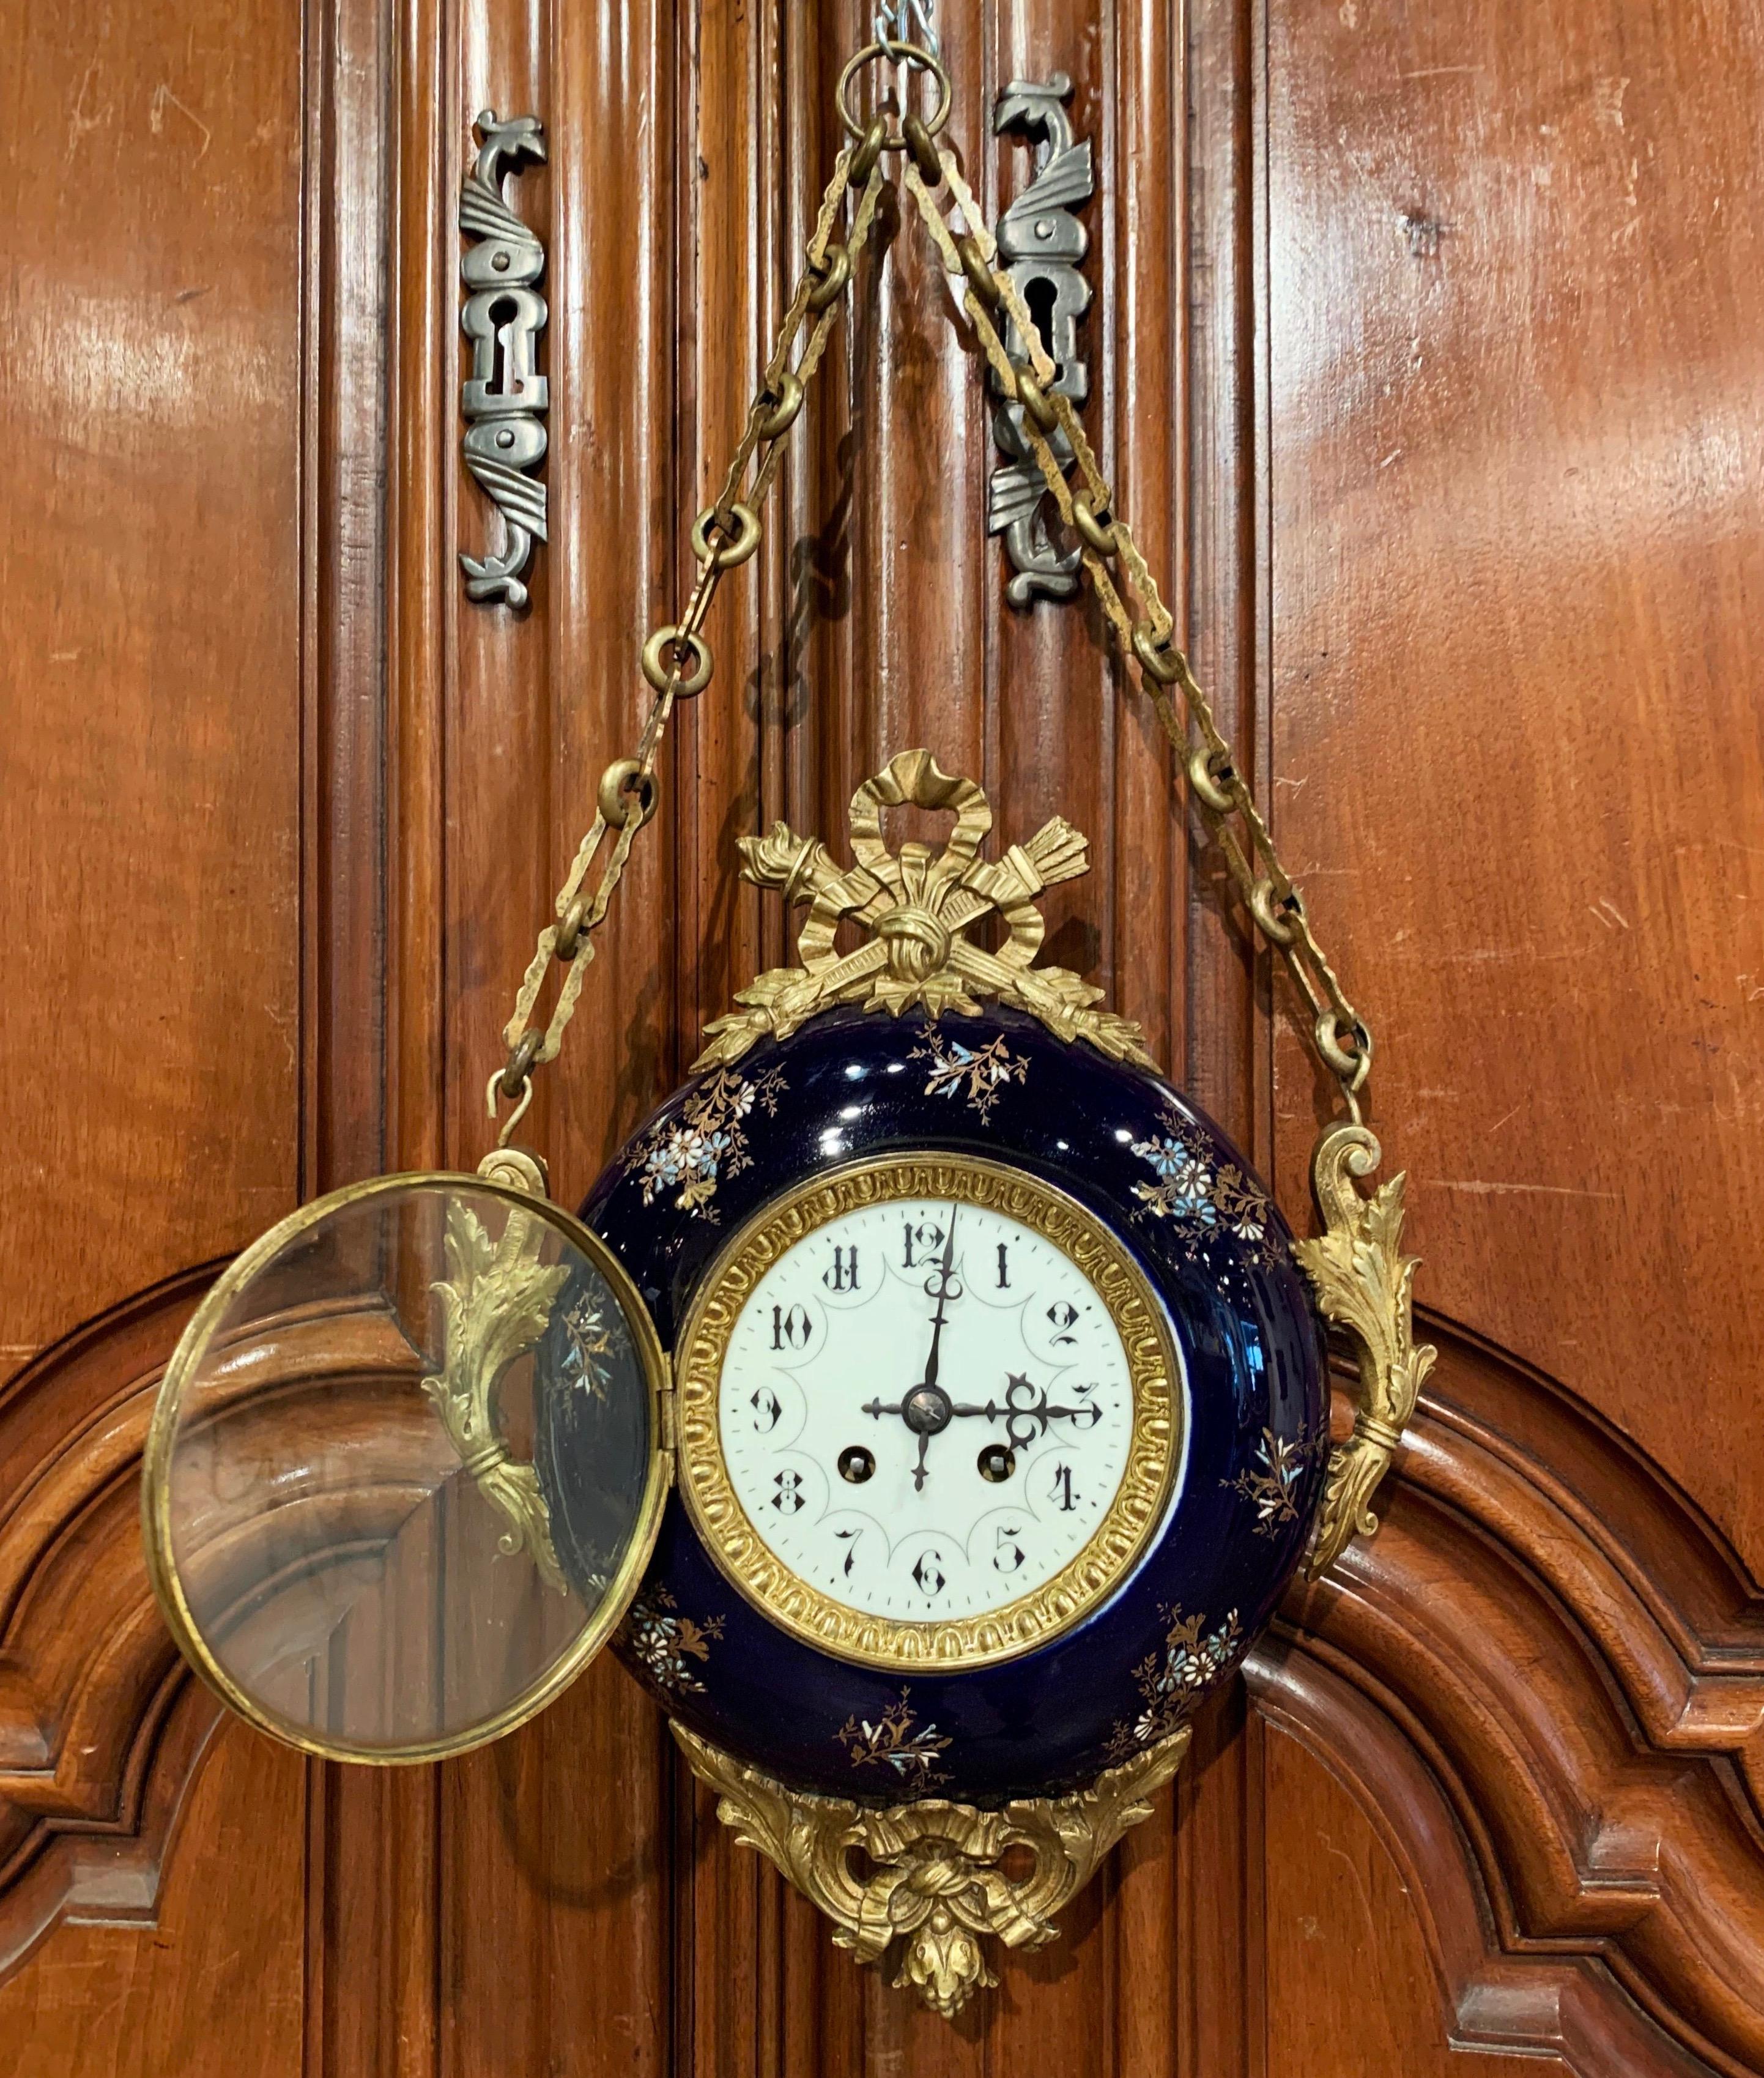 This elegant antique wall hanging clock was crafted in France circa 1870; oval in shape, the colorful clock features brass mounts around the blue cobalt porcelain body decorated with colorful hand painted floral motifs. The central clock face is